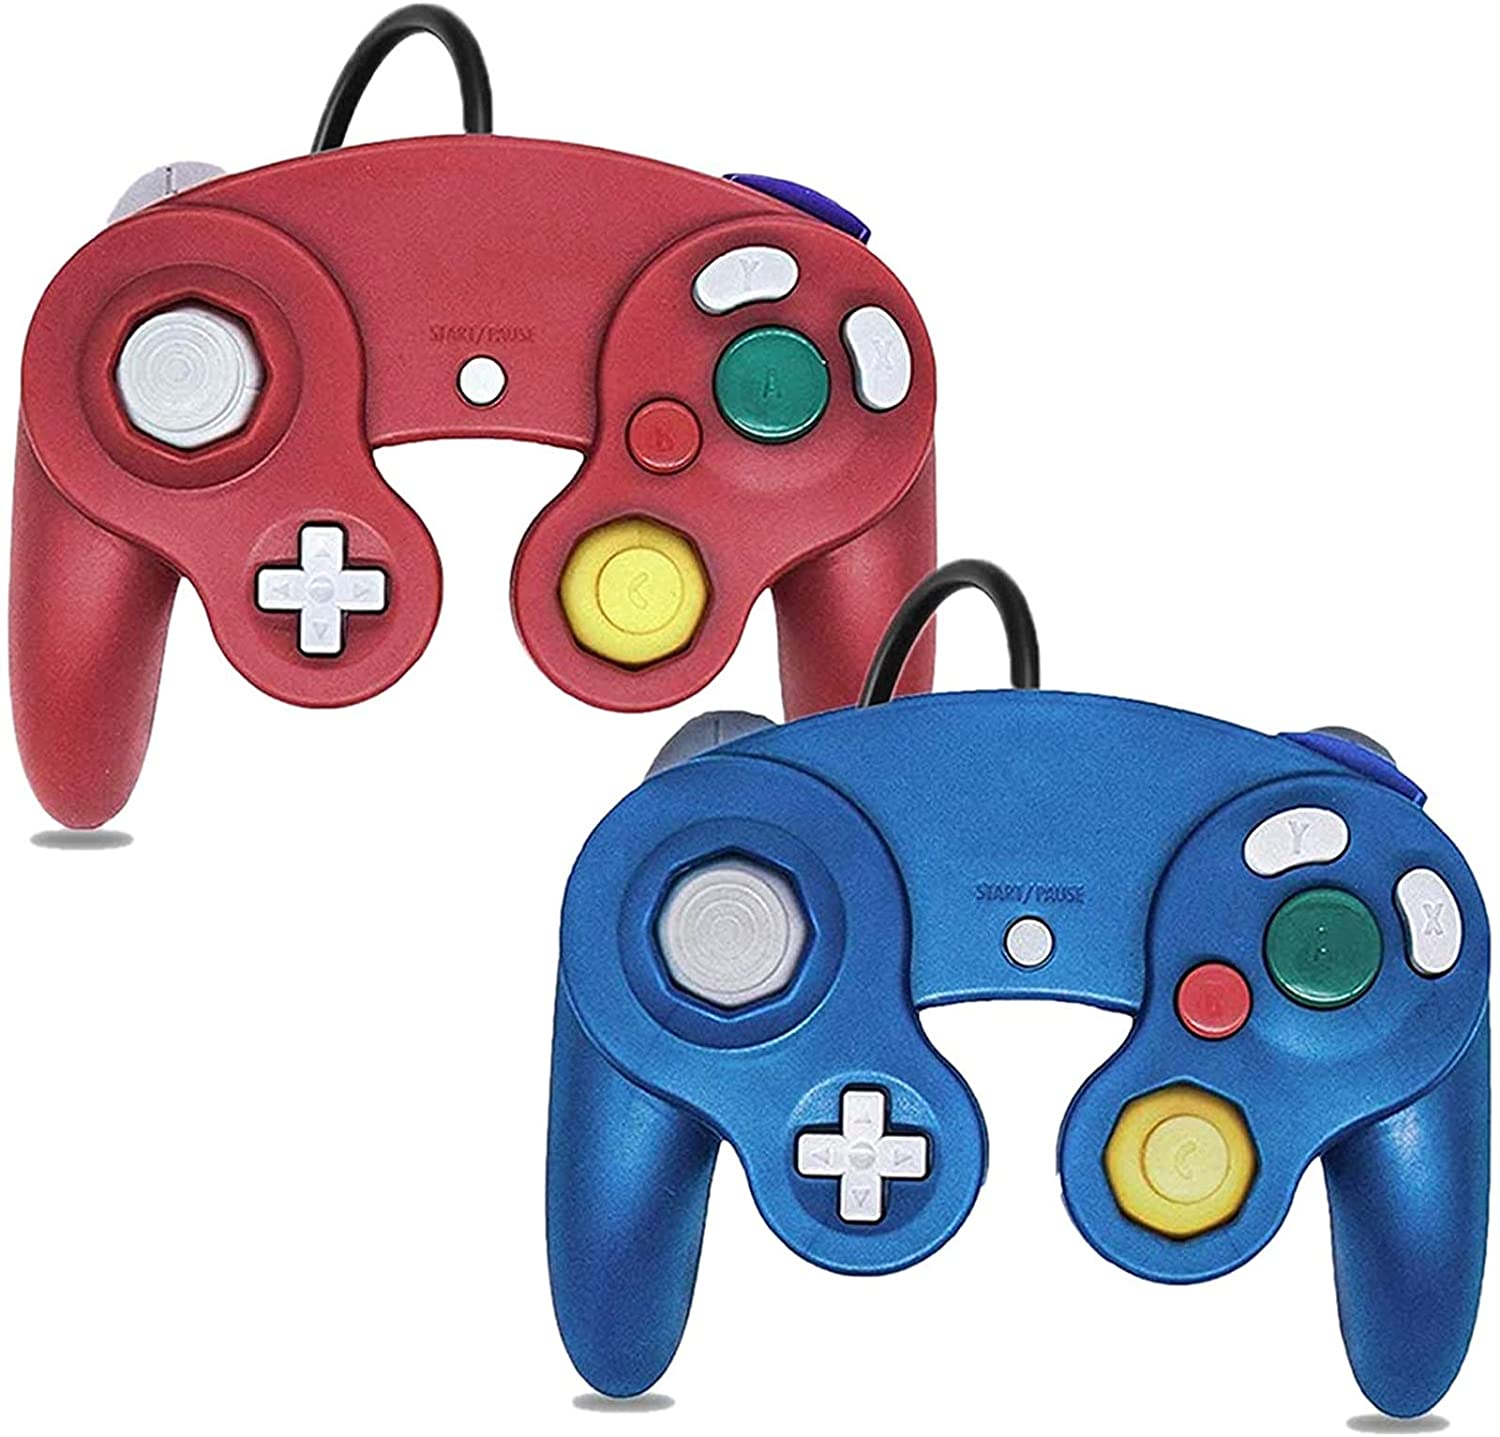 FIOTOK Classic Wired Gamecube Controller, 2-Pack